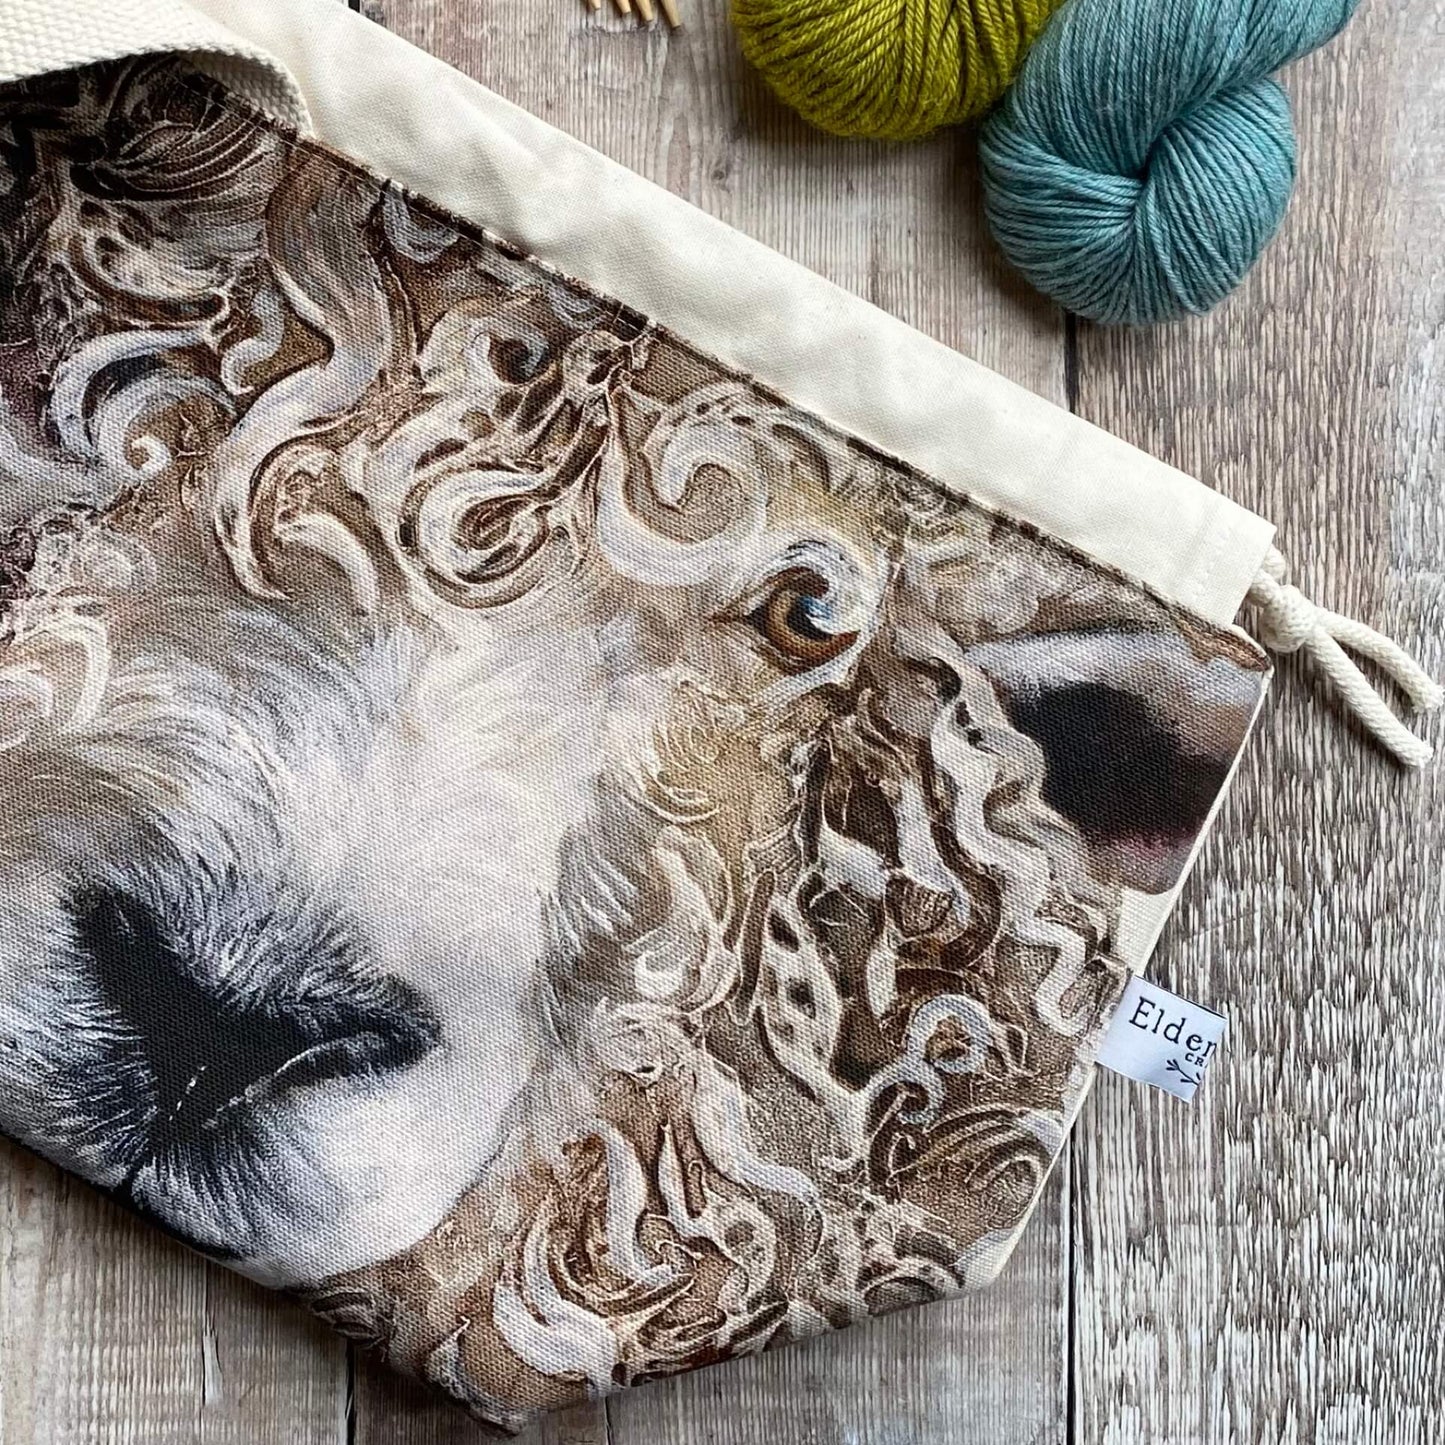 A knitting project bag for medium sized projects lies on a wooden table next to two skeins of yarn. The project bag is handmade and features a large sheep face. 